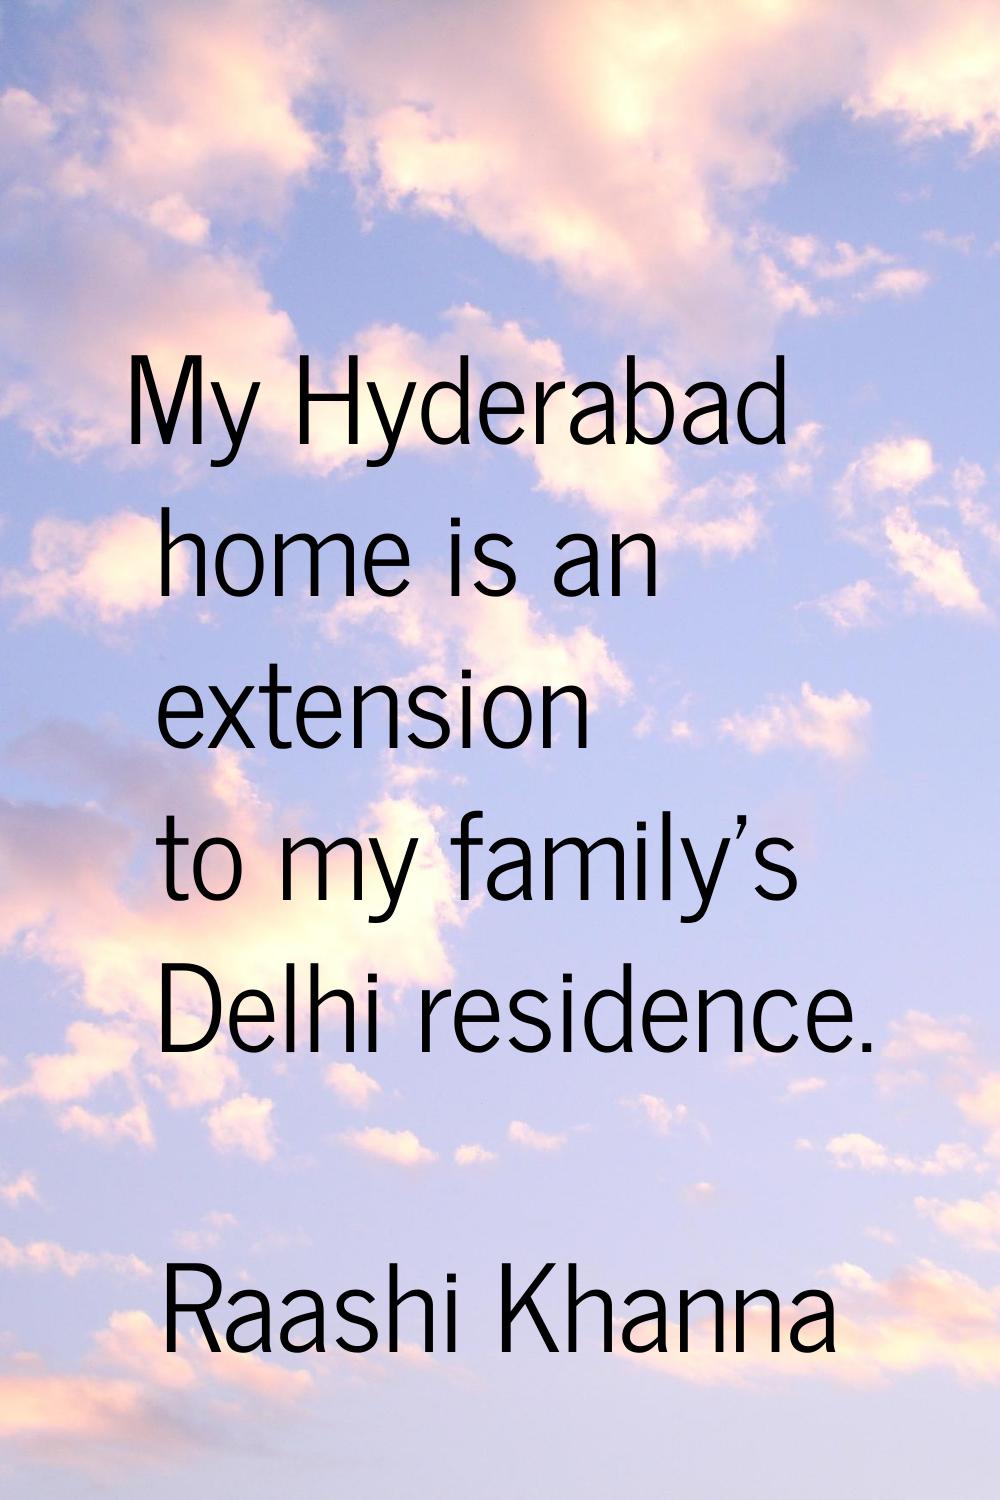 My Hyderabad home is an extension to my family's Delhi residence.